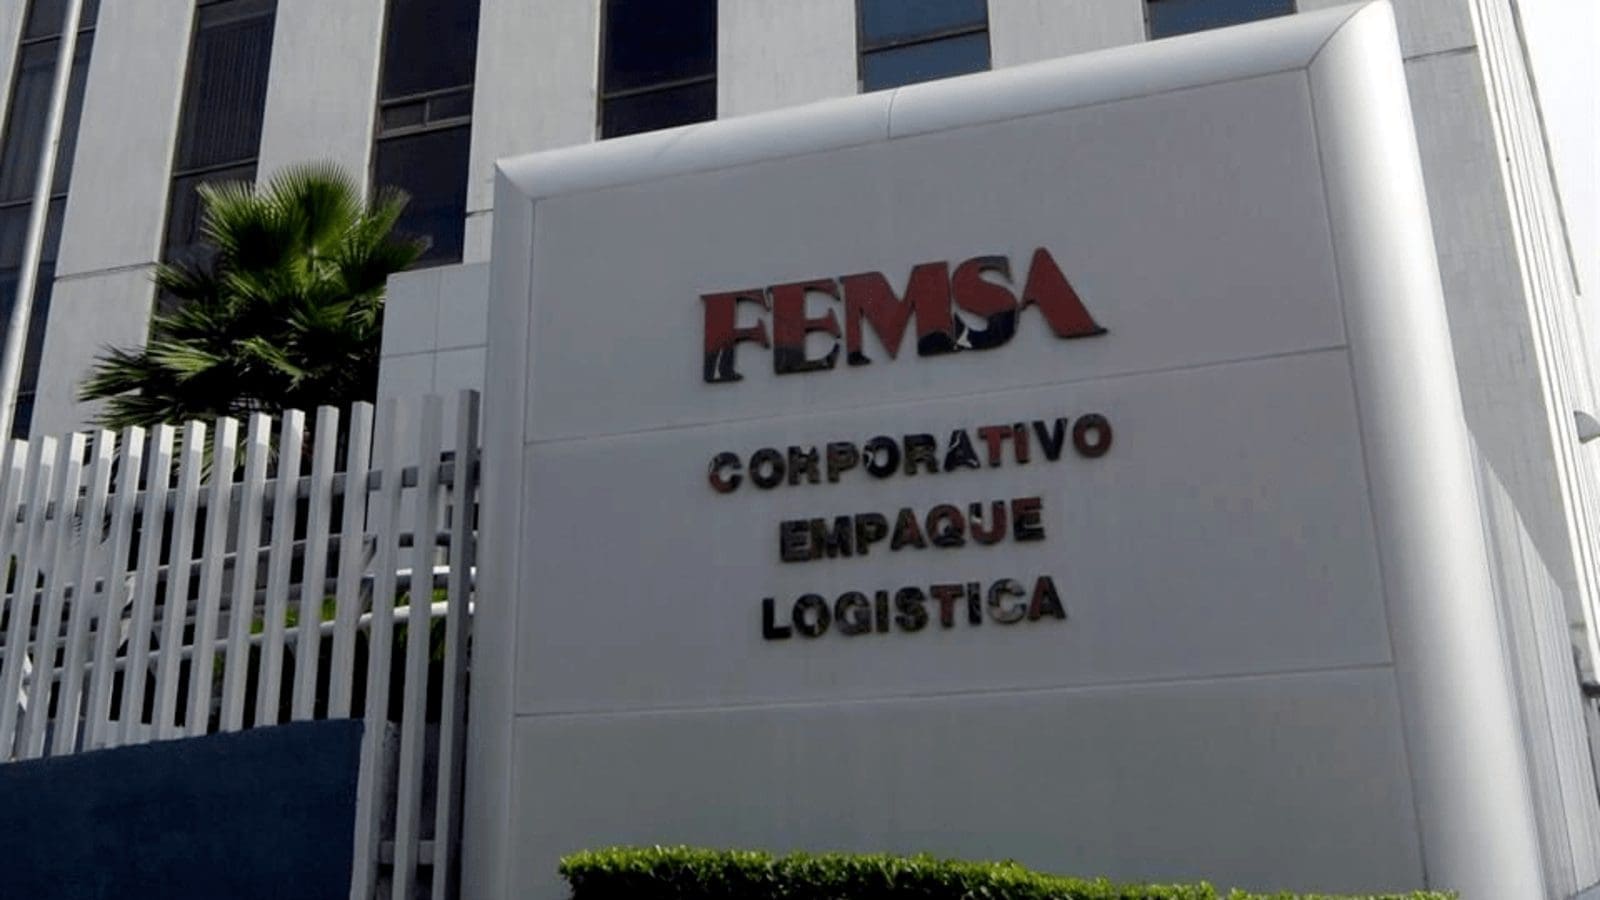 Mexican beverage giant Femsa to make entry into Europe through acquisition of Valora